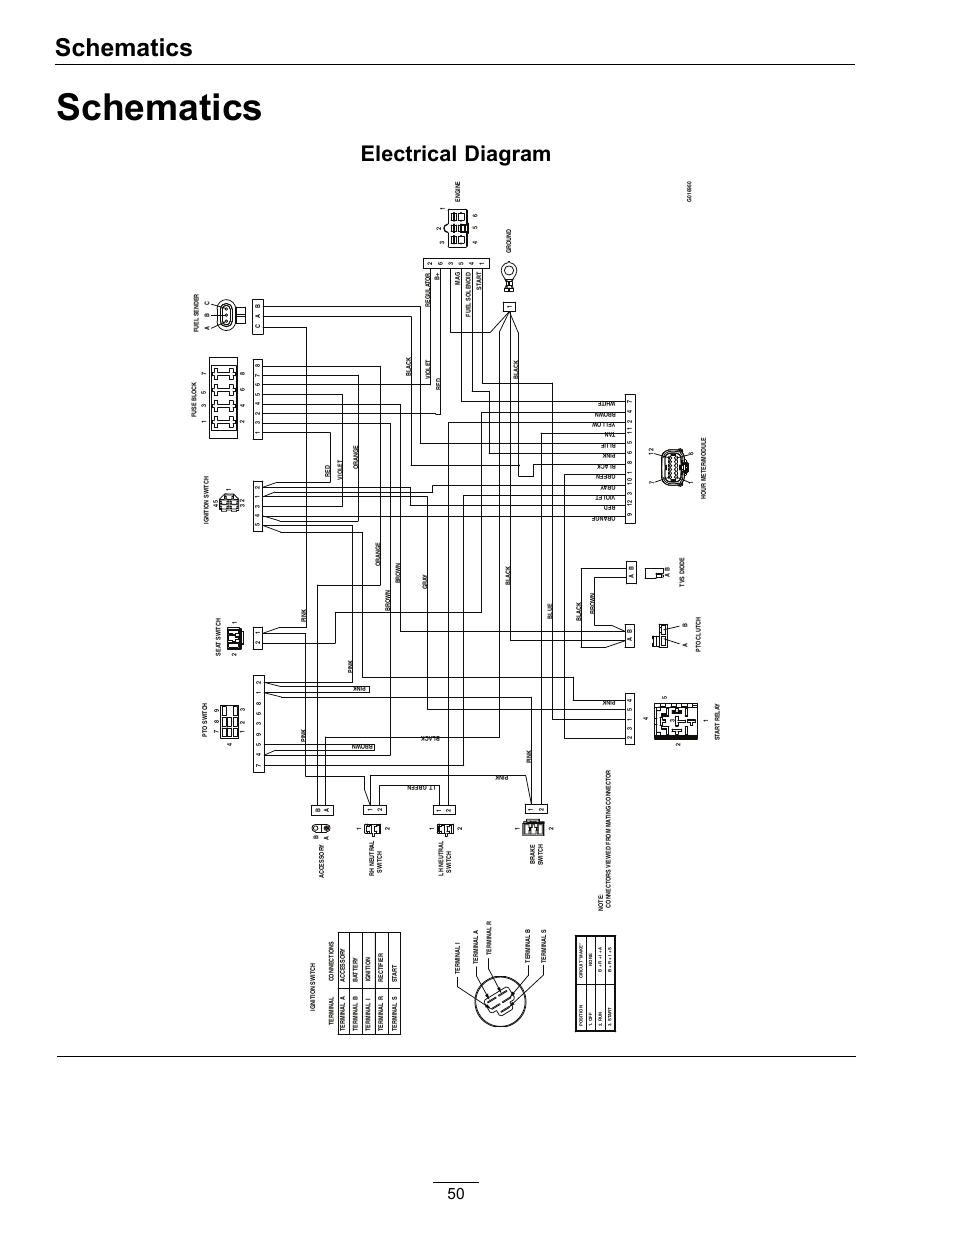 wiring diagram for part number m4600. g on a kenmore dryer